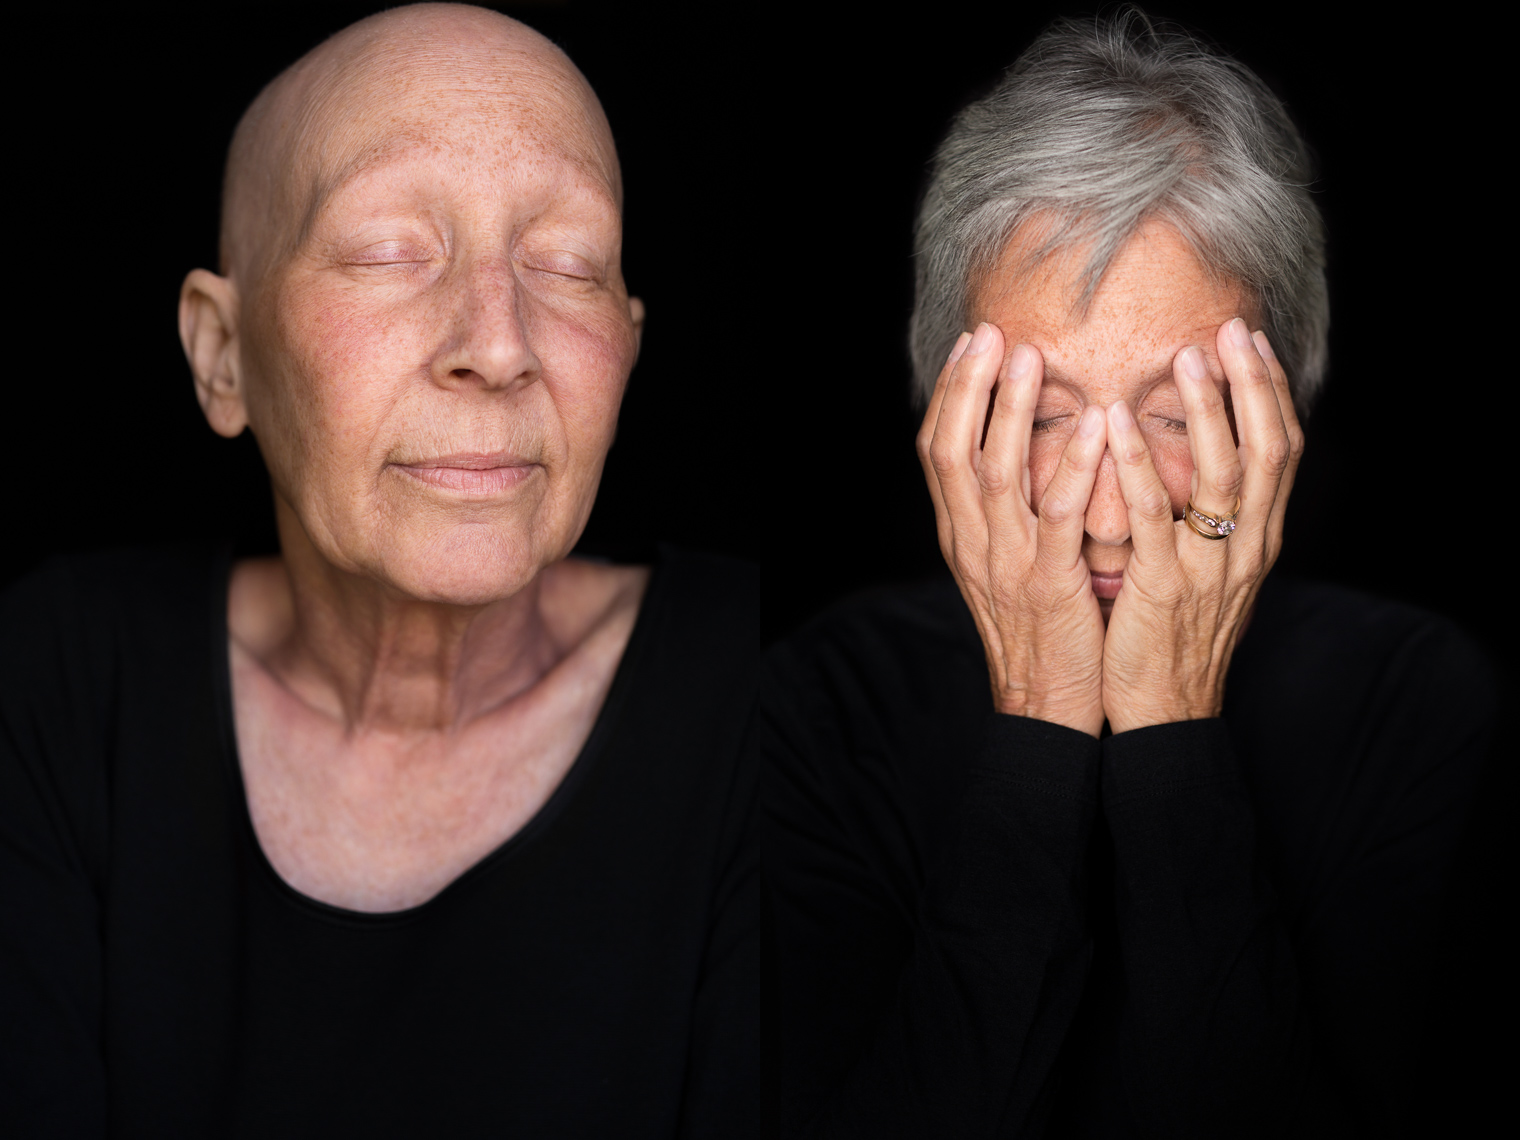 Facing Chemo Before and After - a photographic exhibit examing the effects of chemotherapy - by healthcare photographer Robert Houser